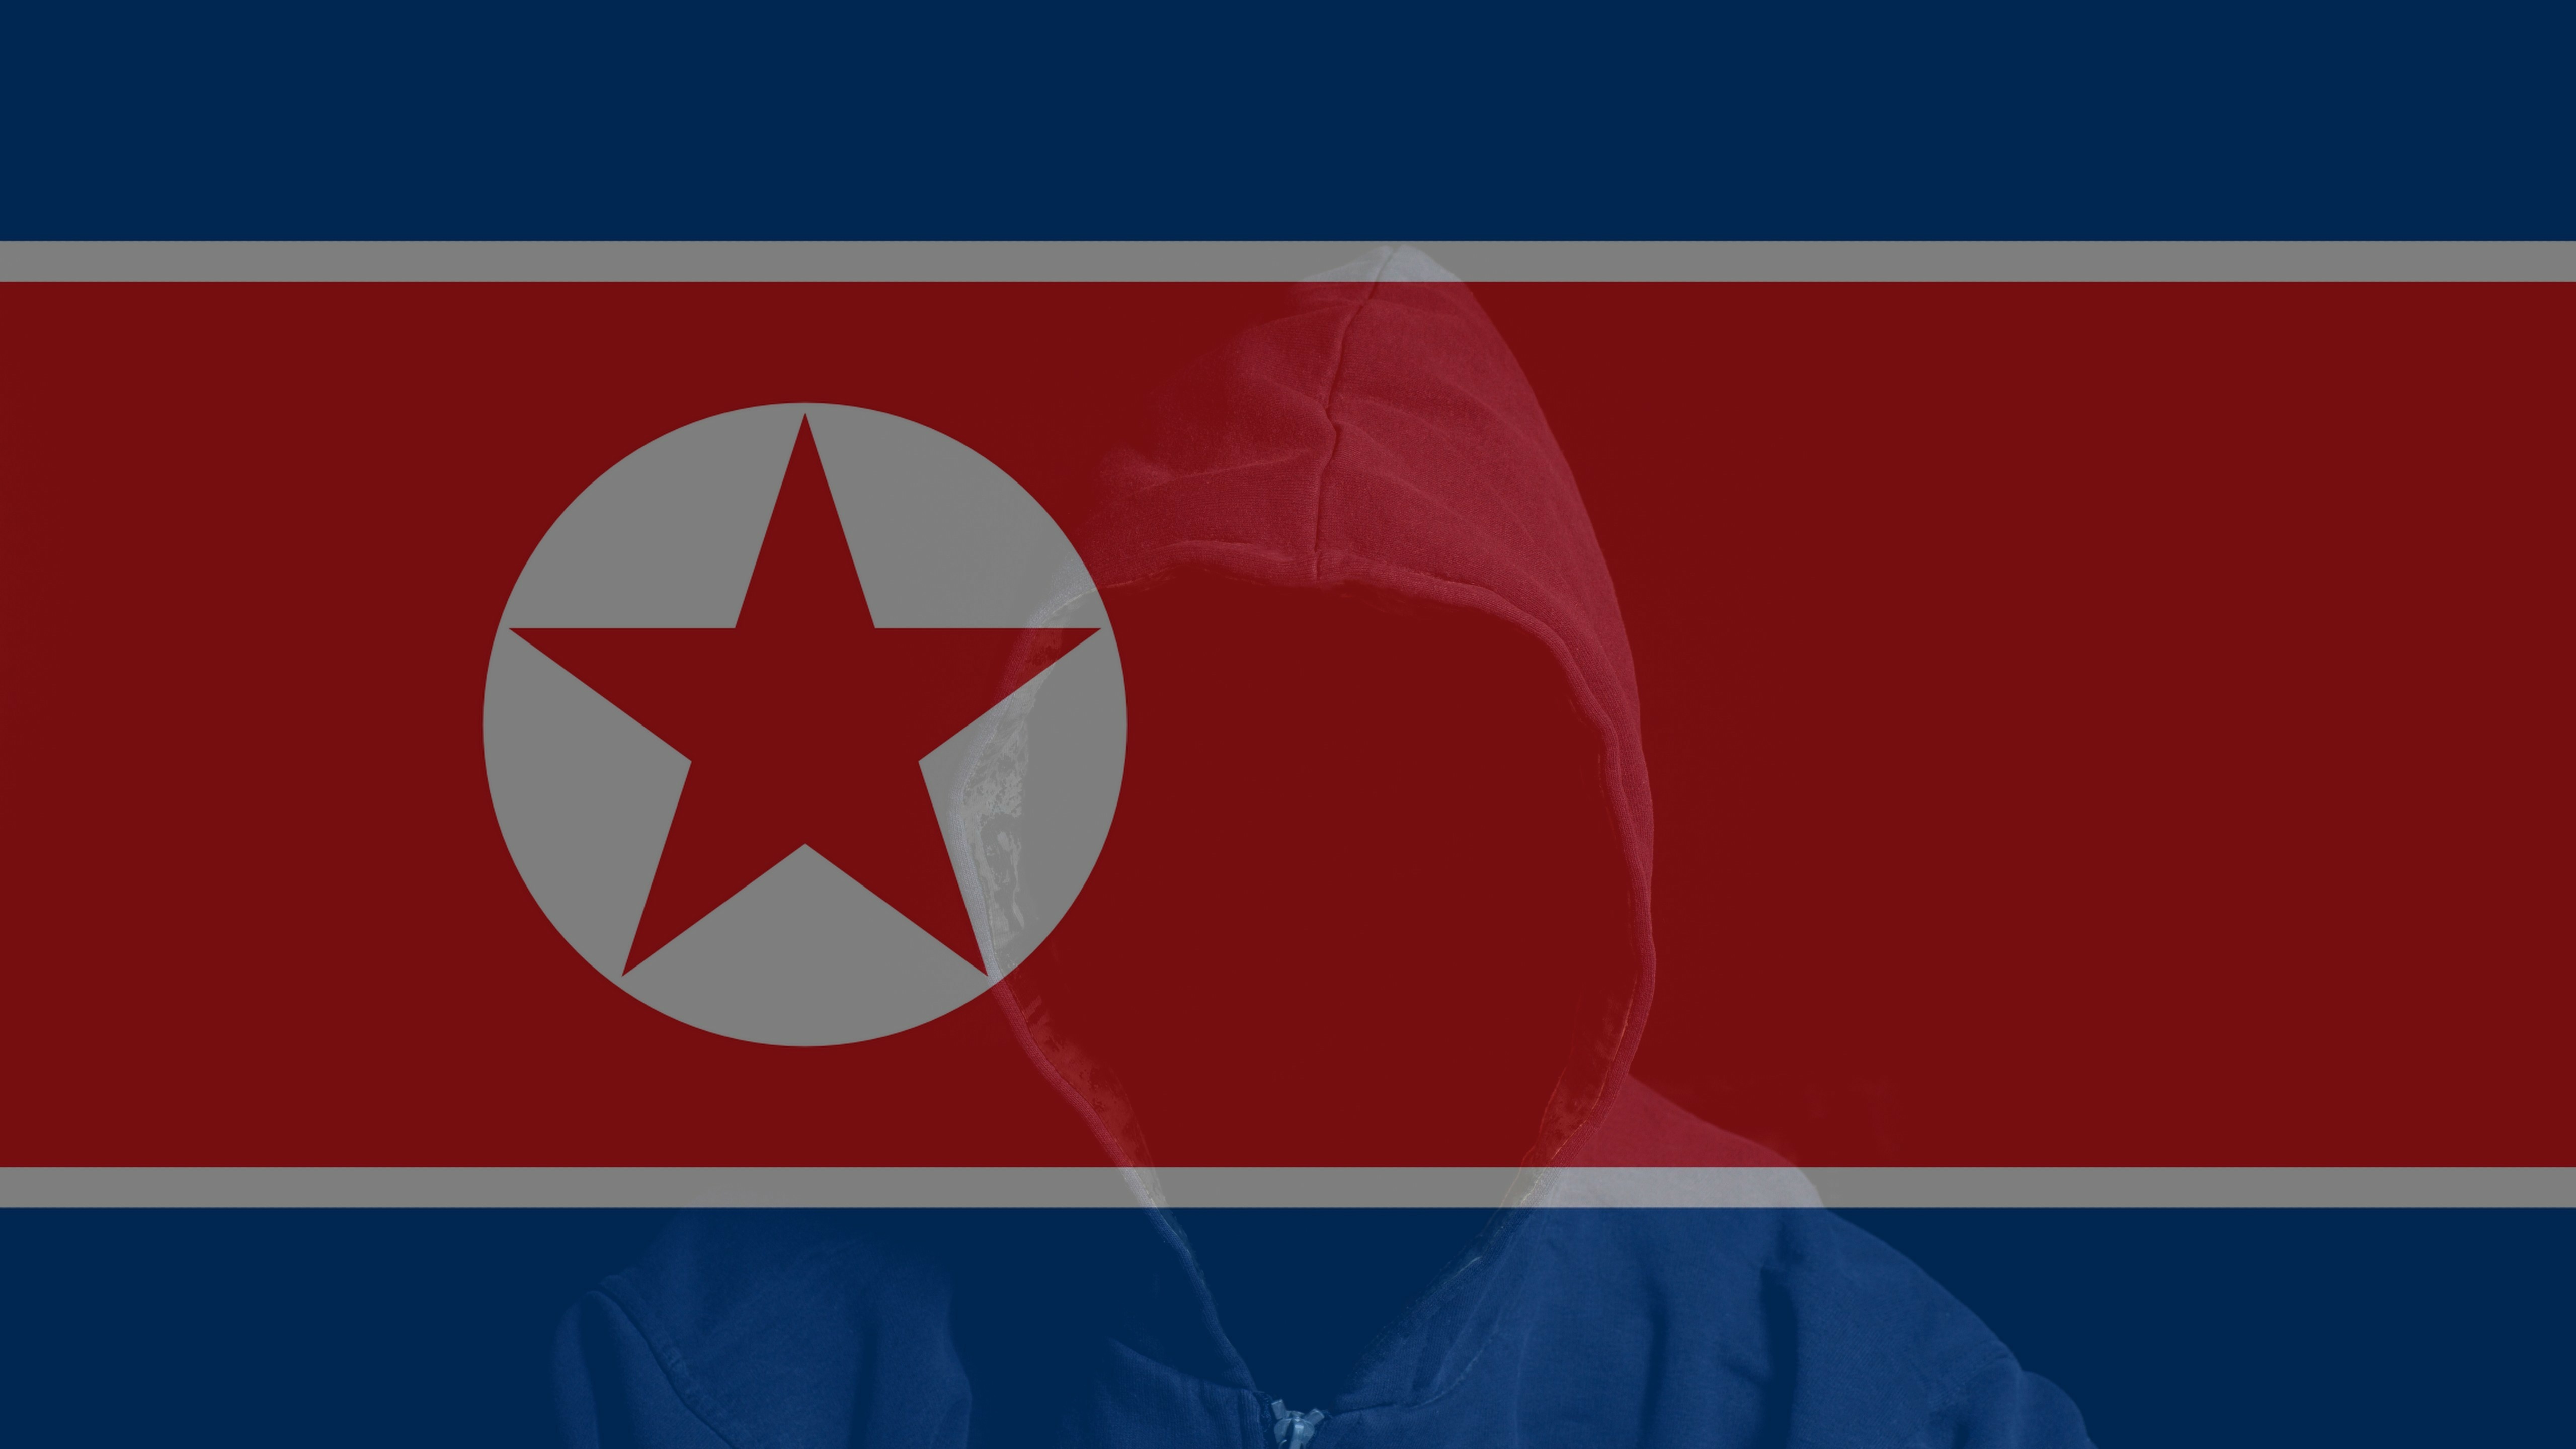 The North Korean flag with a hooded figure sitting in the foreground.